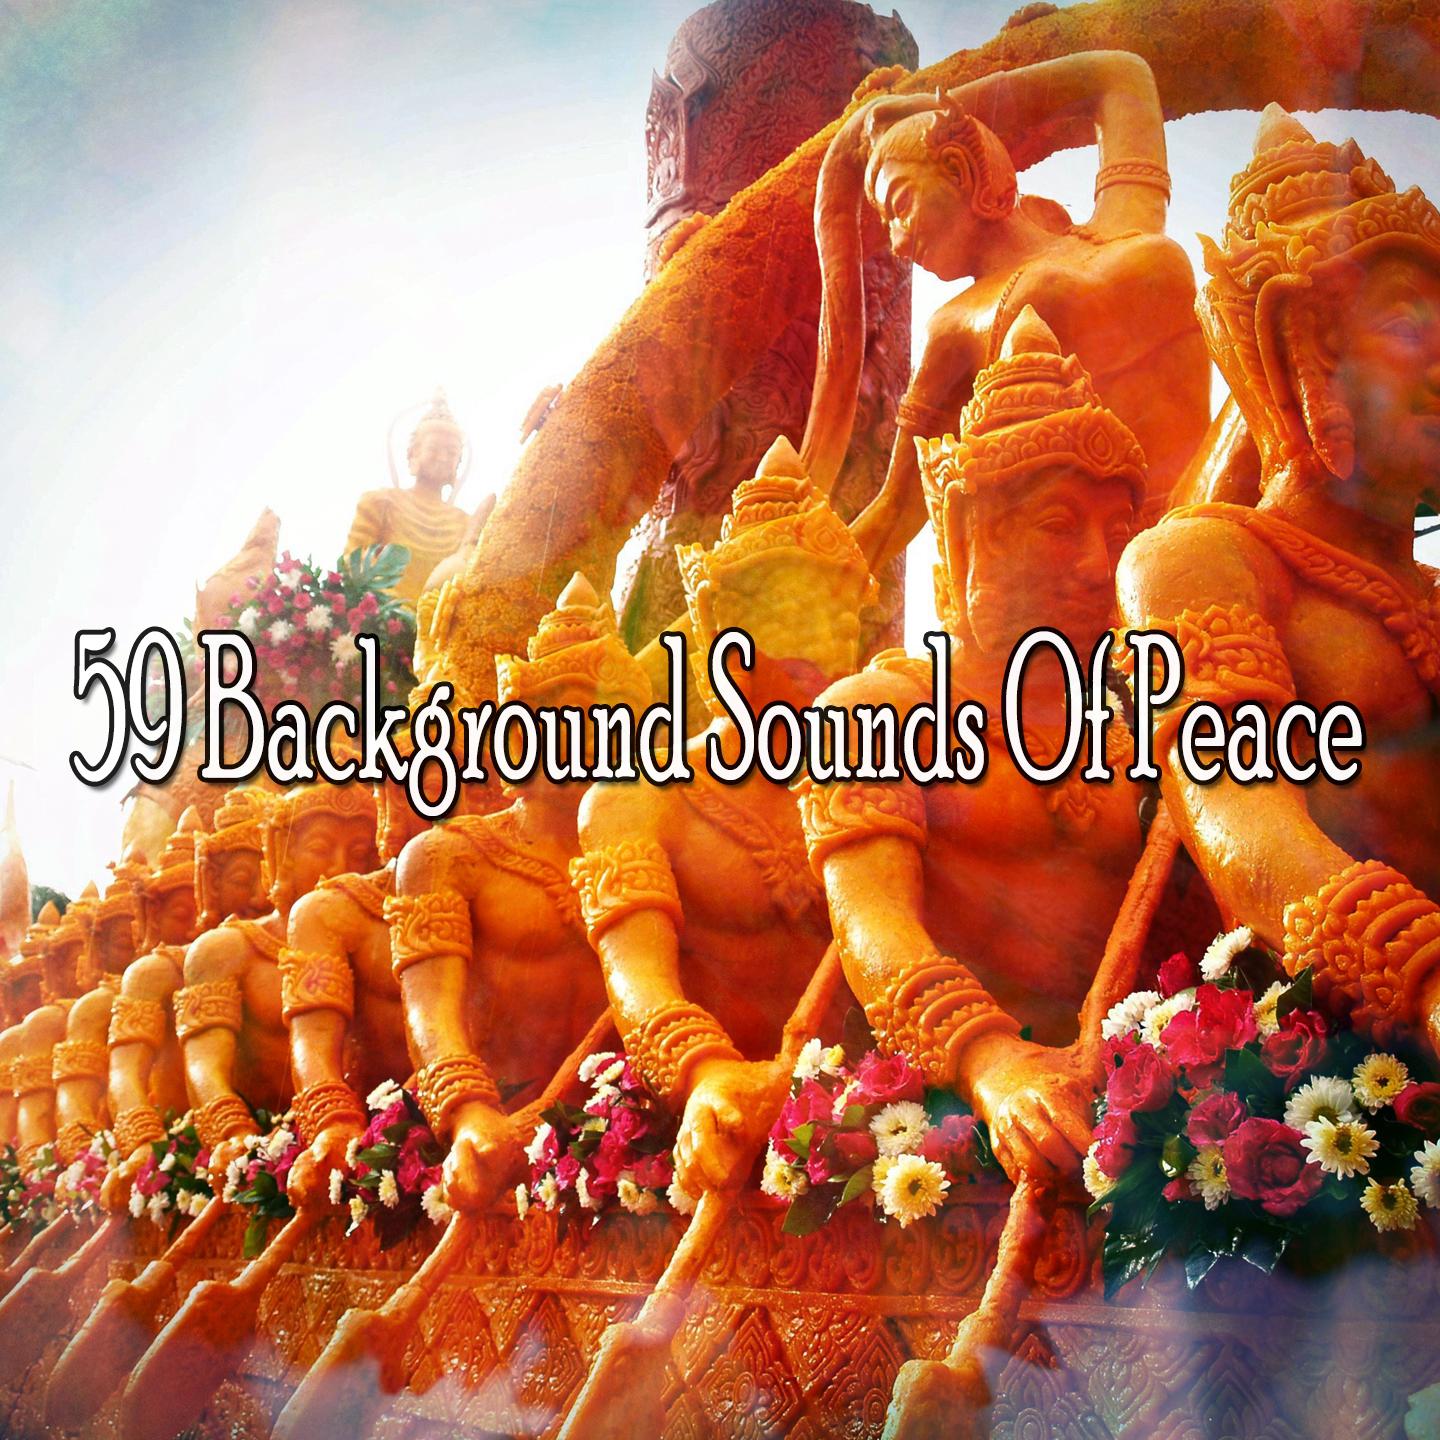 59 Background Sounds of Peace